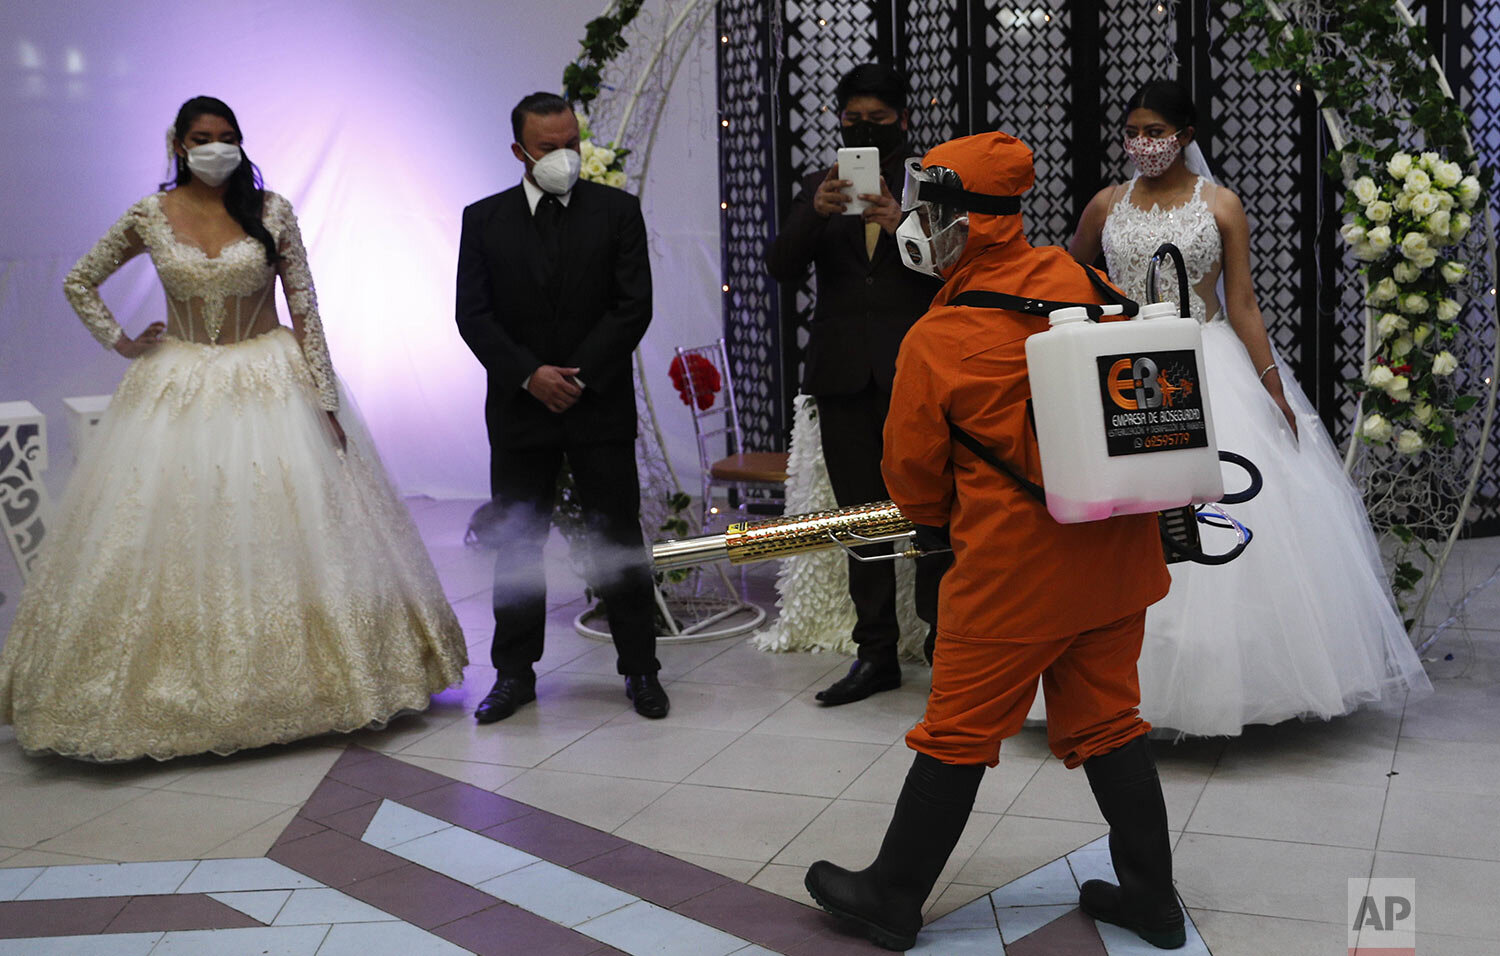  A man wearing a full protection suit sprays disinfectant on two couples in bridal dresses and suits, inside a ballroom after a mock wedding during the partial lifting of restrictions amid the COVID -19 pandemic in La Paz, Bolivia, Oct. 7, 2020. (AP 